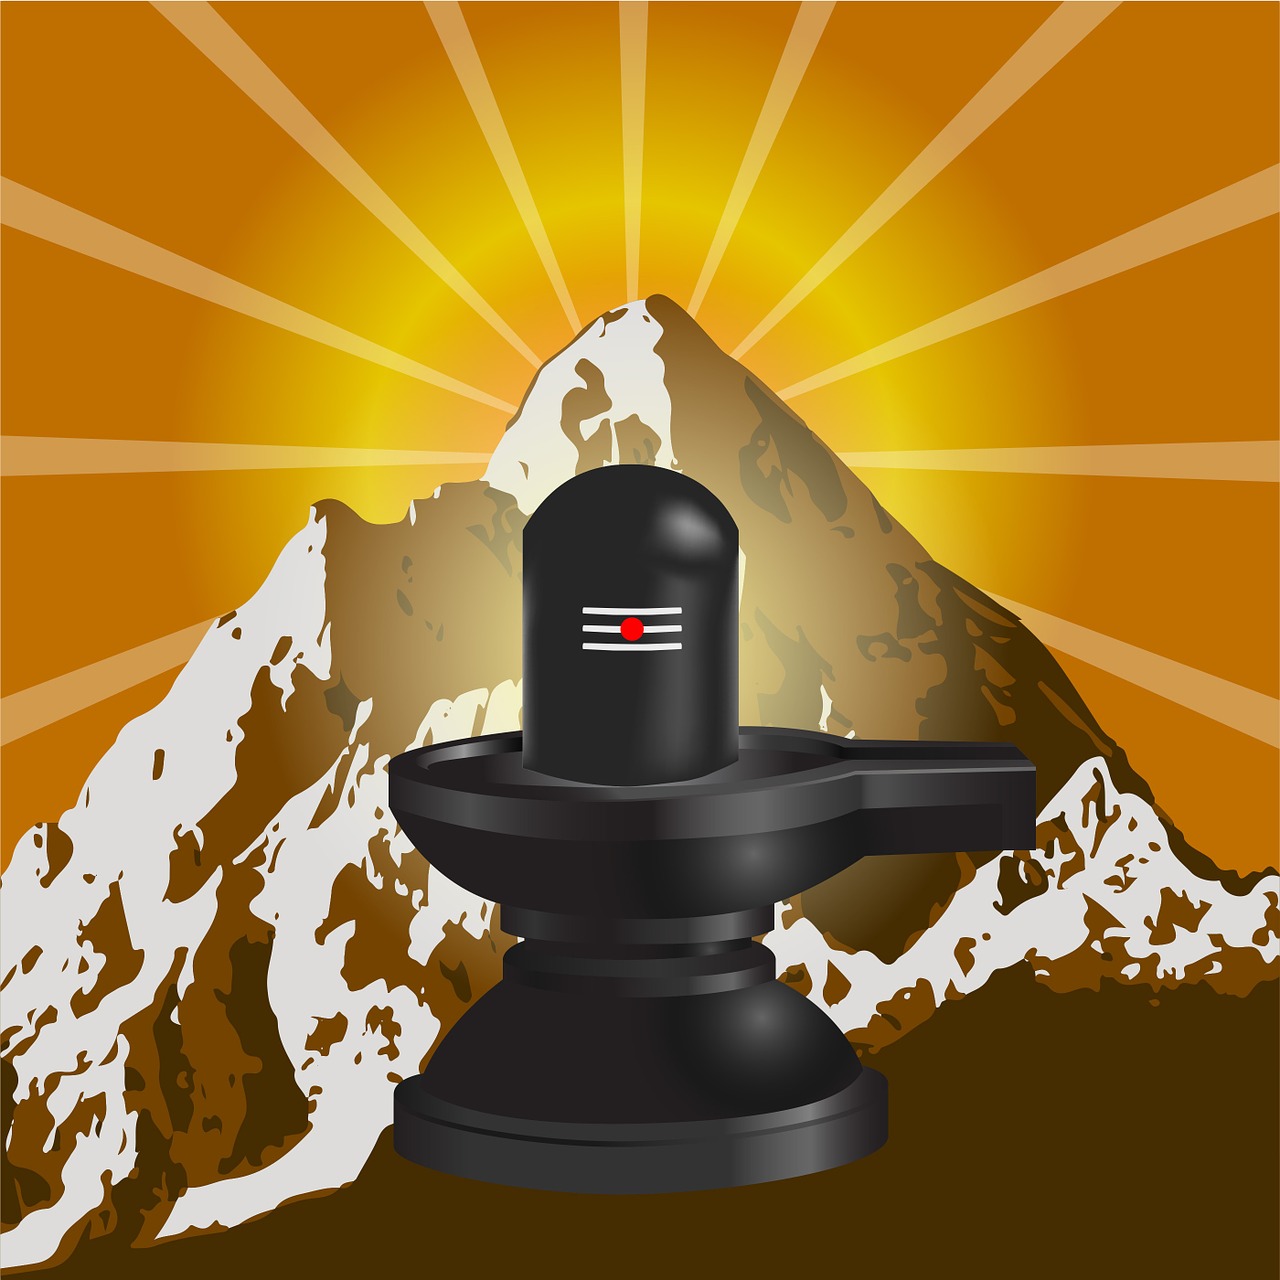 Download free photo of Shiv,shiv ling,hindu,hinduism,india - from ...